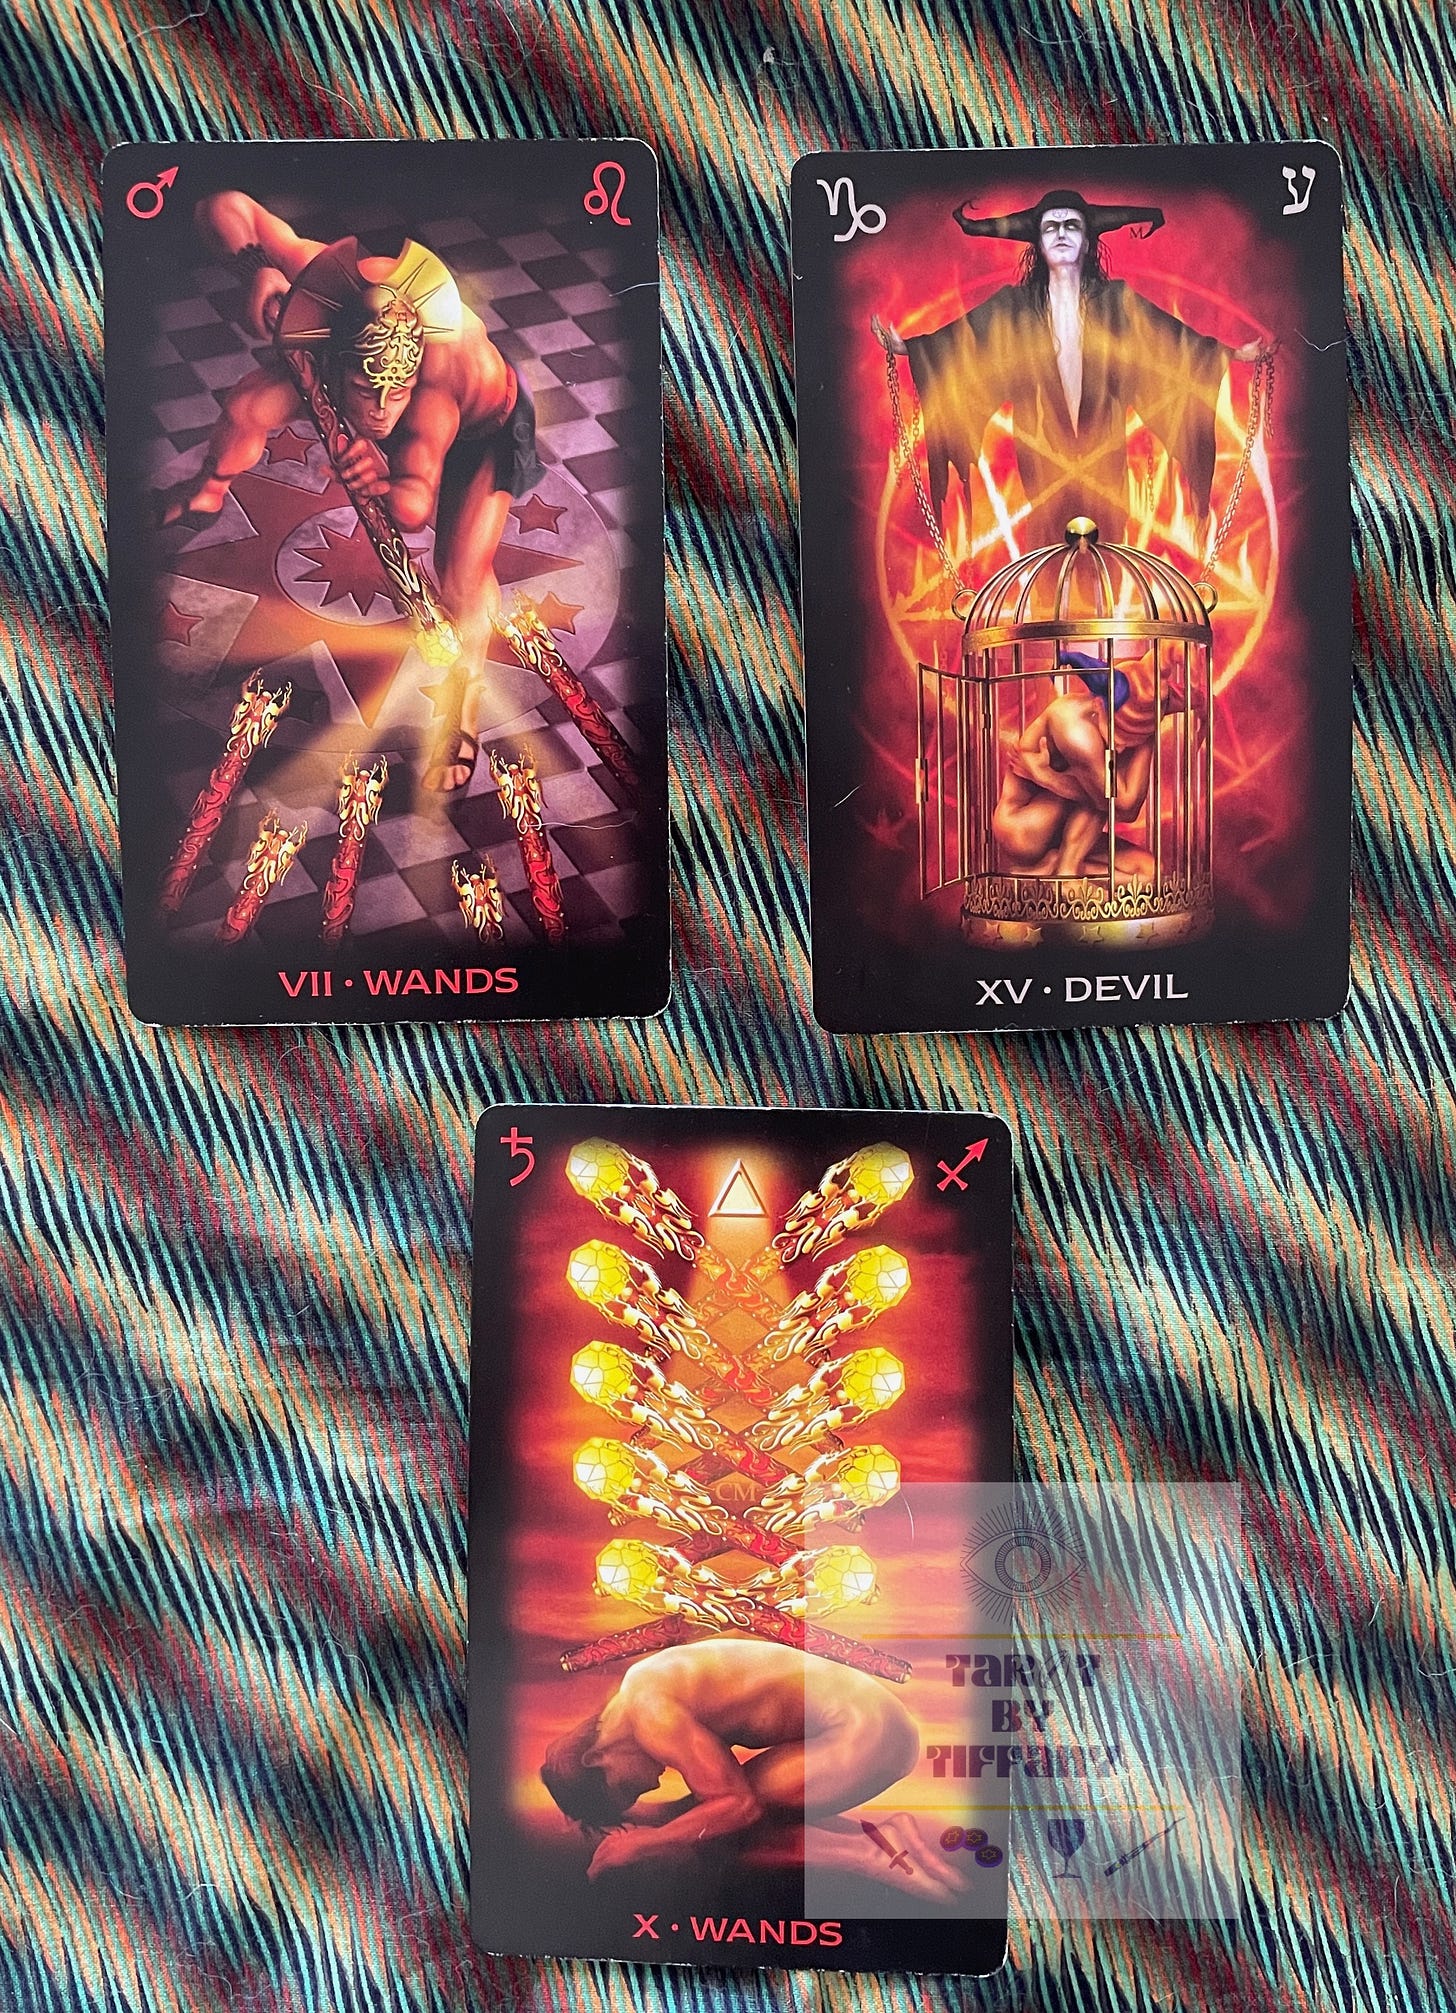 3-card spread using the Tarot of Dreams. Cards are on a cloth background with brown, dark green, and gold diagonal stripes. Top two cards (left to right): 7 of Wands and The Devil. Bottom card: 10 of Wands.